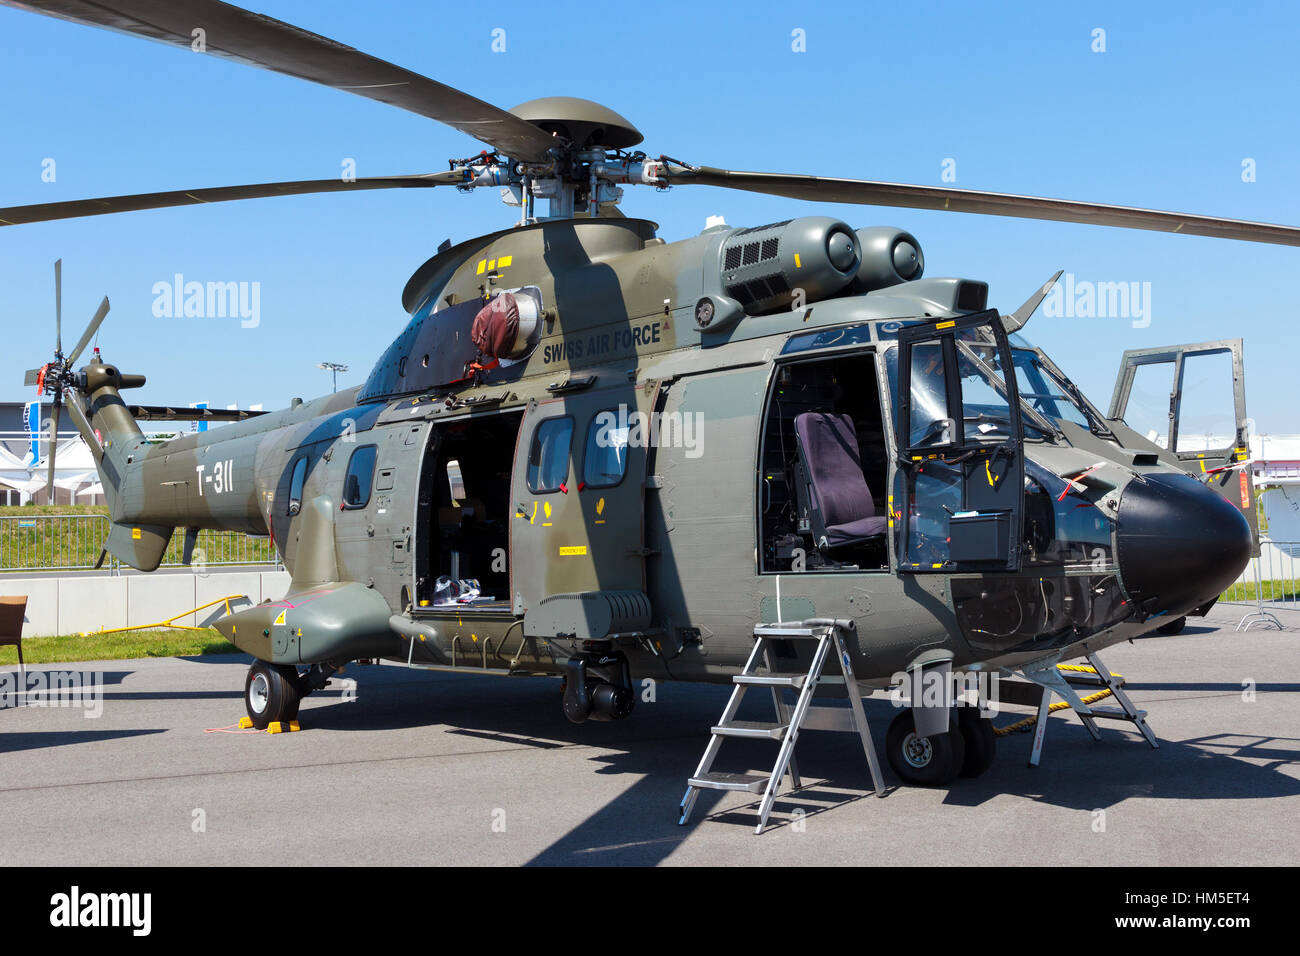 BERLIN, GERMANY - MAY 22: Swiss Air Force AS332 Super Puma transport  helicopter at the International Aerospace Exhibition ILA on May 22nd, 2014  in Ber Stock Photo - Alamy